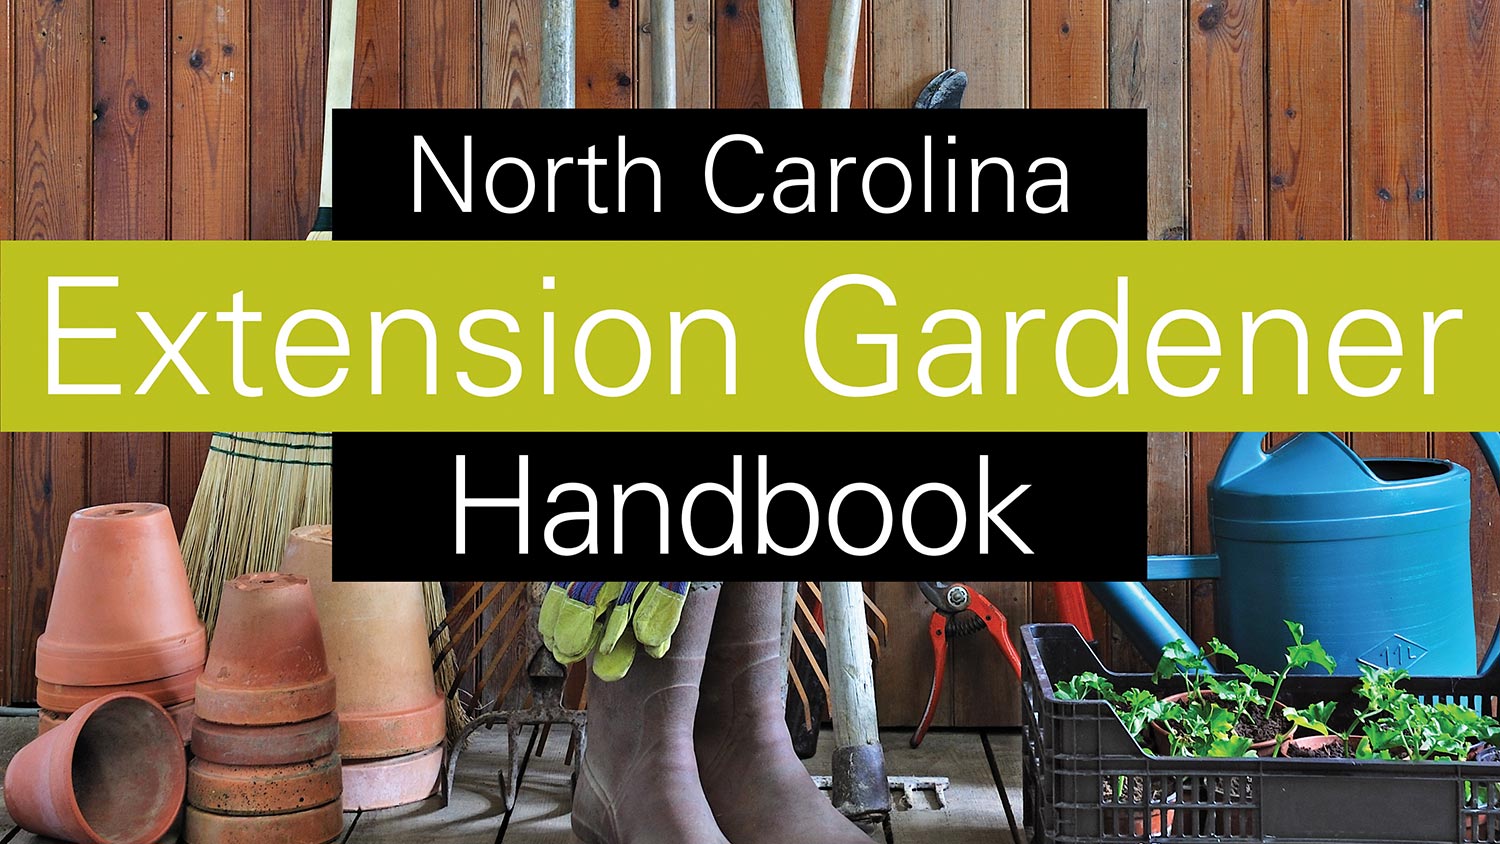 A cropped image of the North Carolina Extension Gardener Handbook cover.